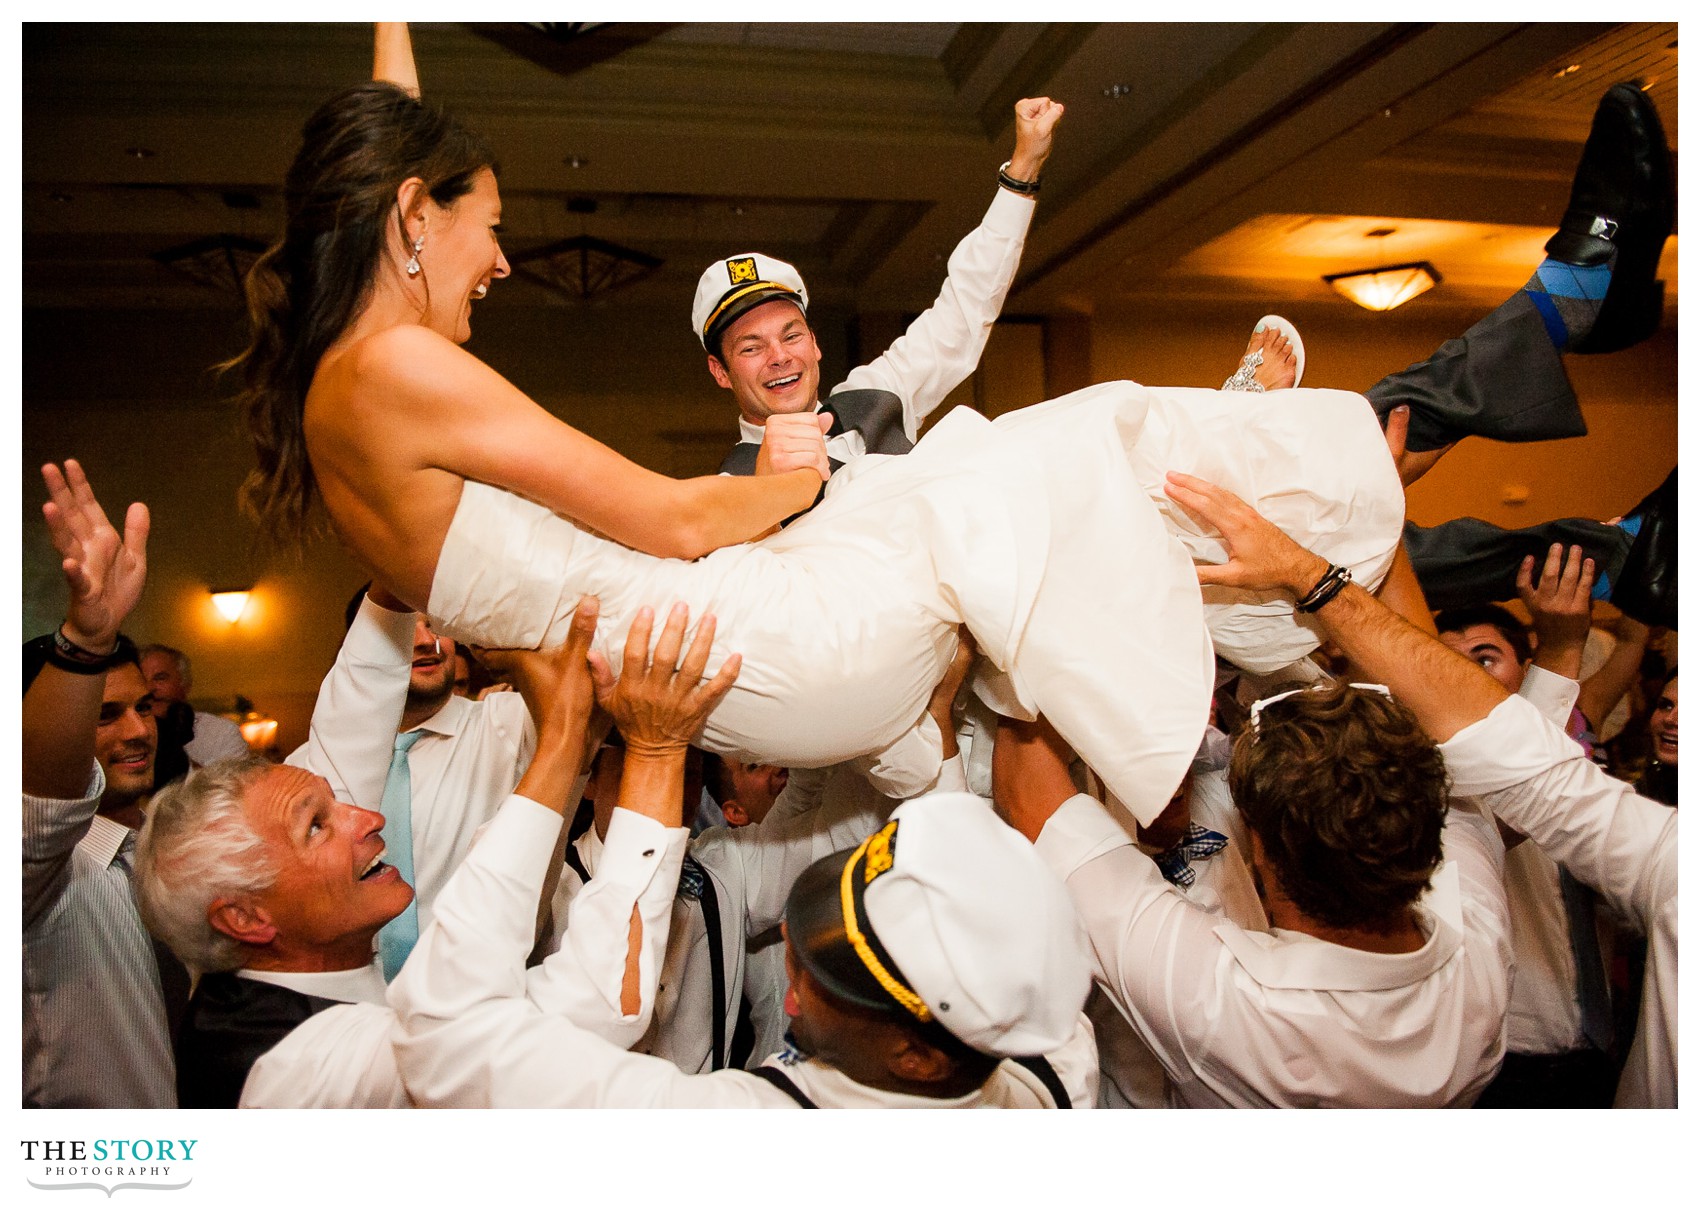 friends and family lift up bride and groom at wedding reception